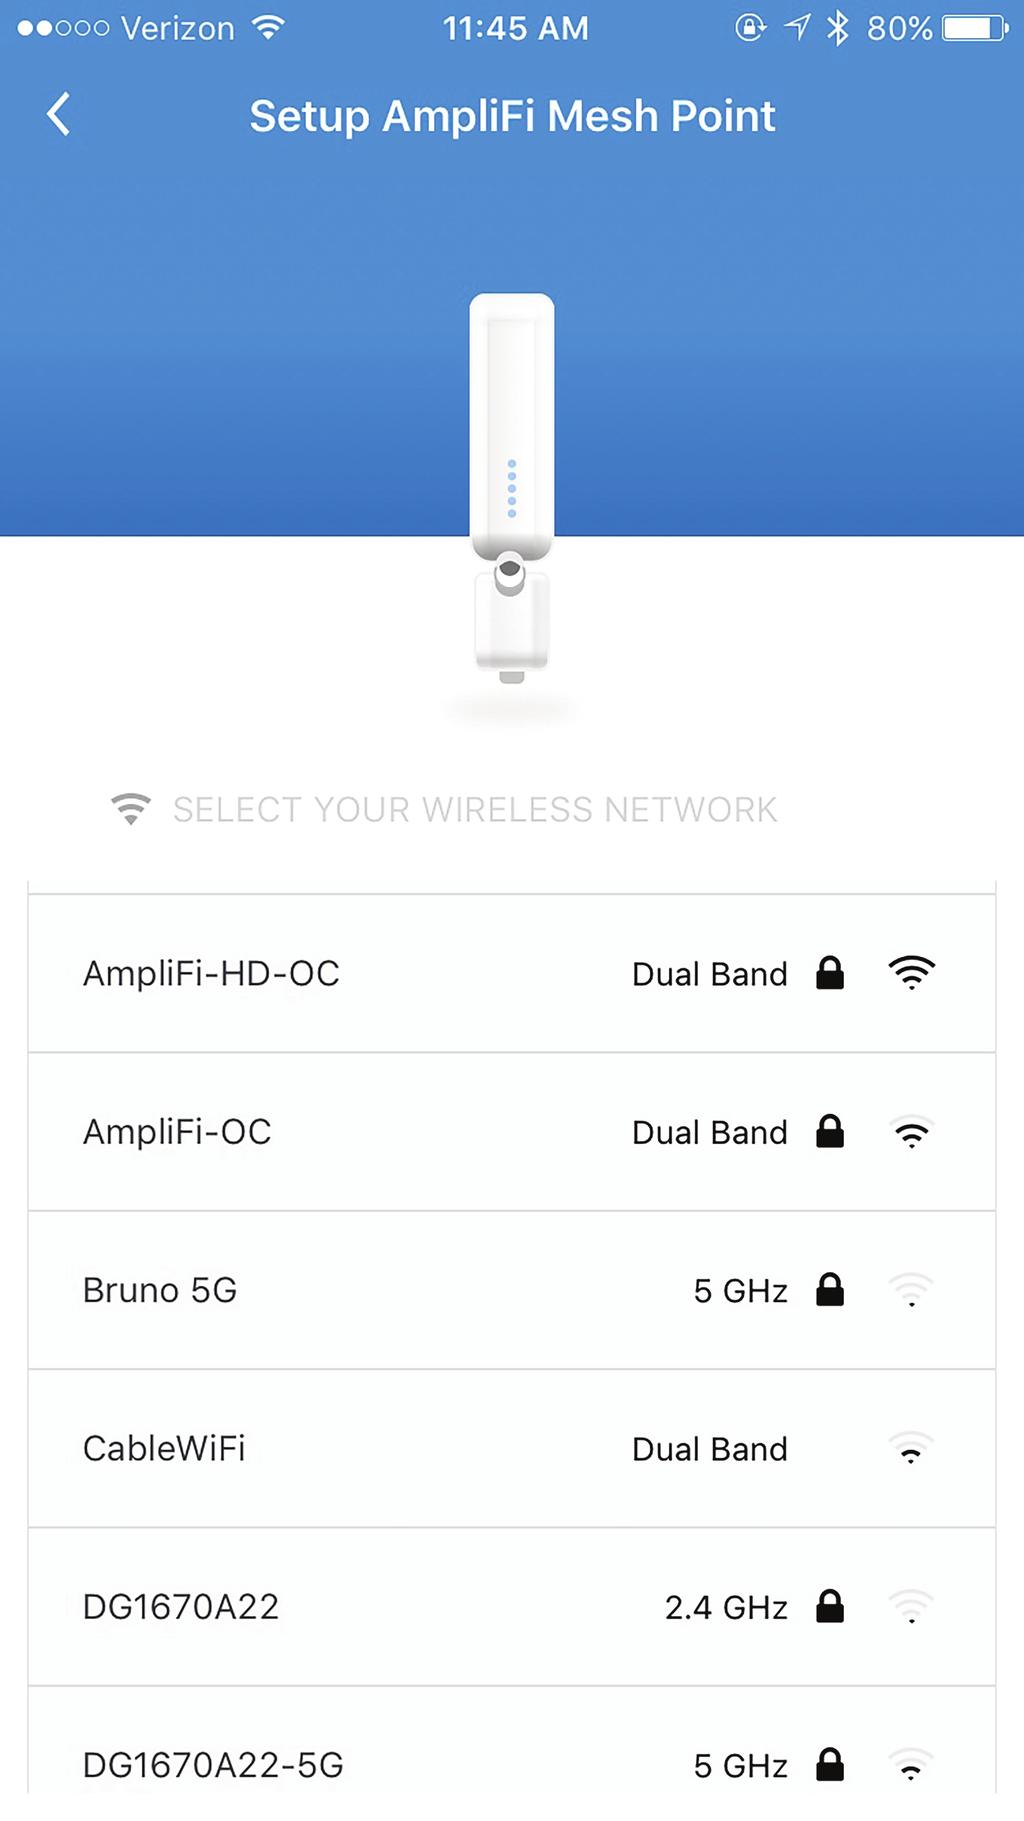 AmpliFi User Guide 2. The app will display a list of available Wi-Fi networks. Select the network associated with your Router. 3.